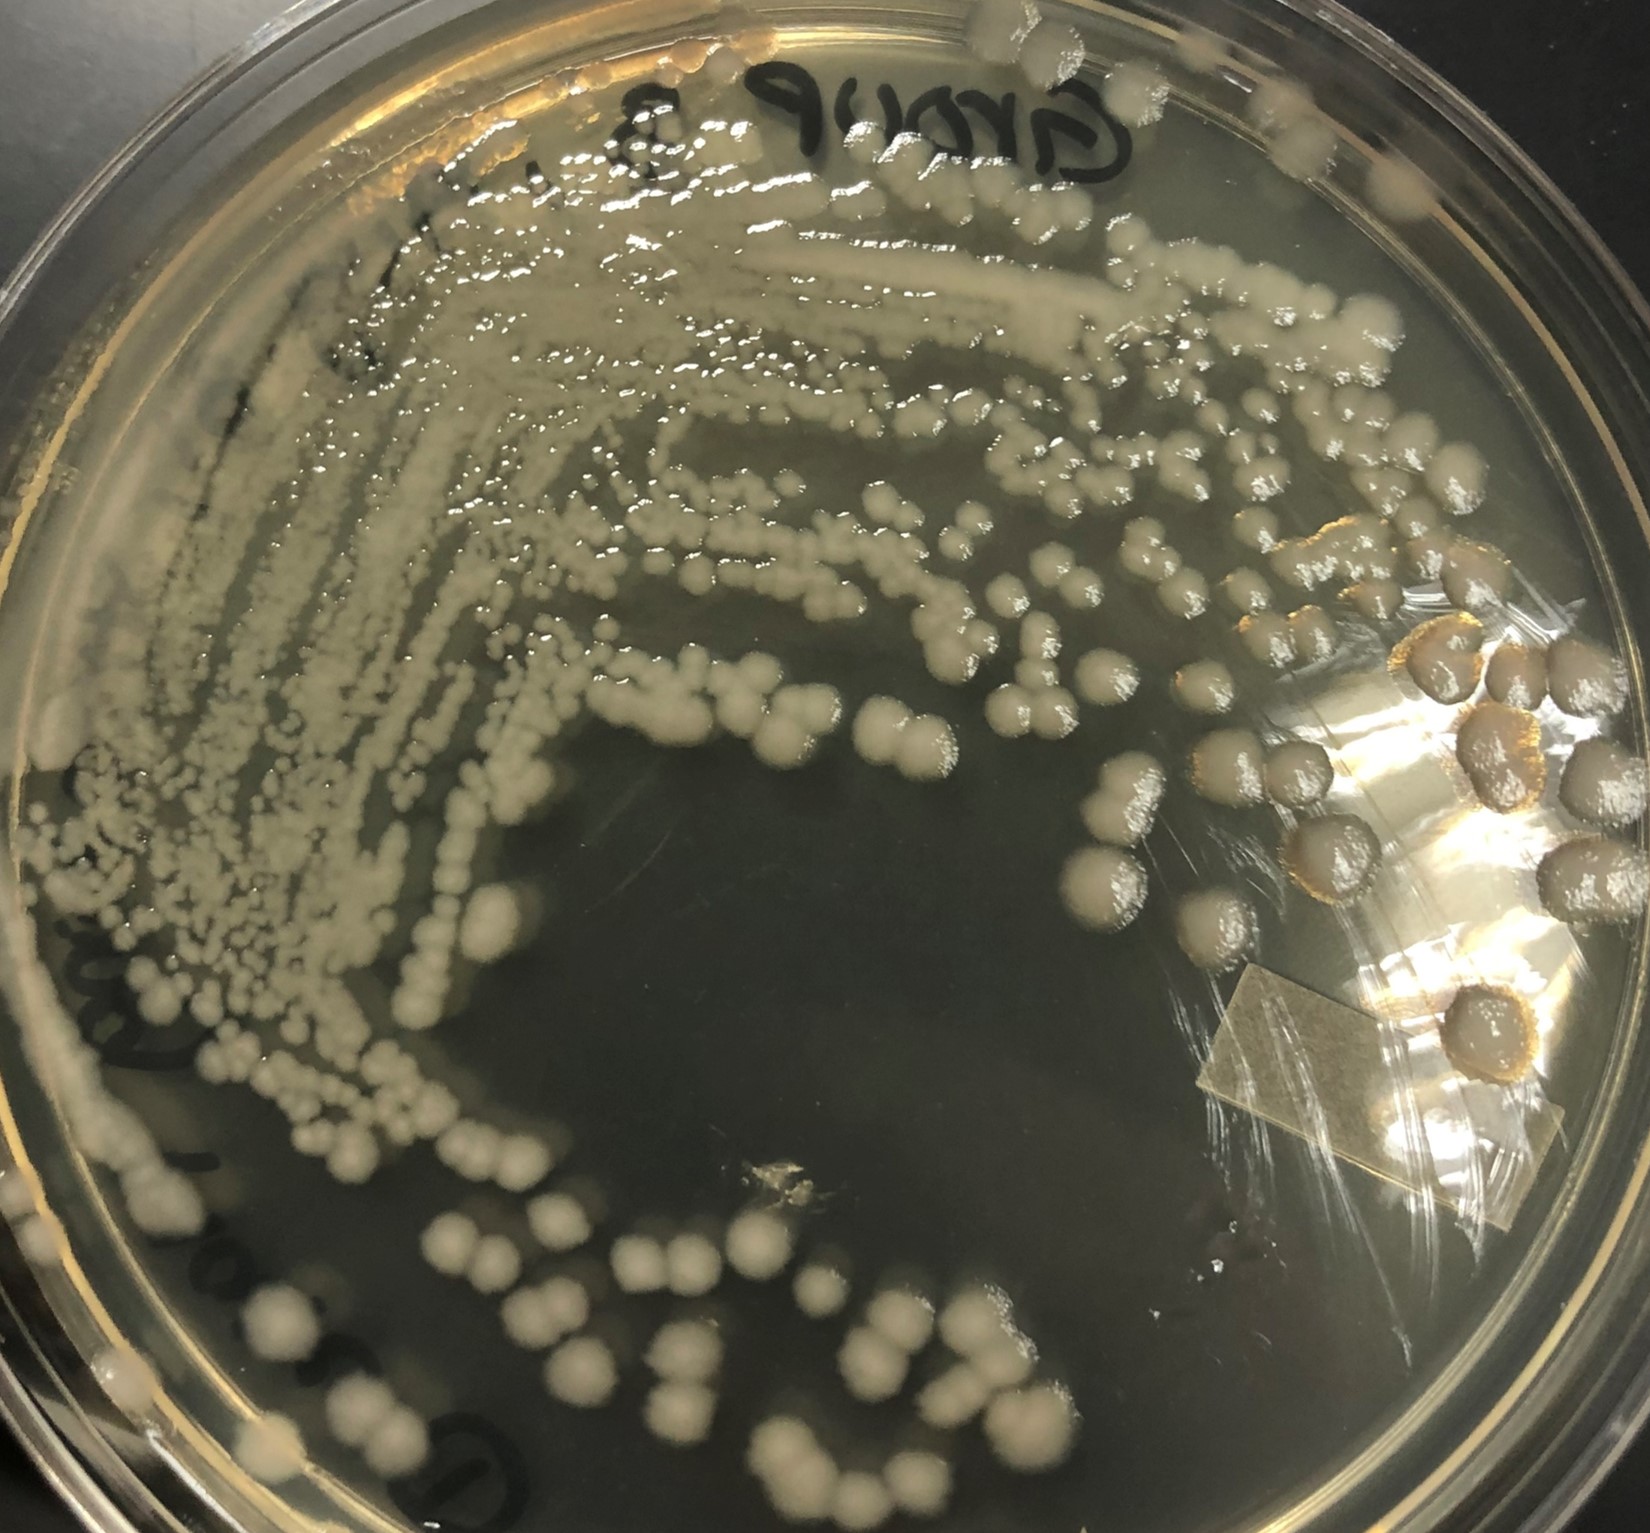 41: Unknown Bacteria Identification Project